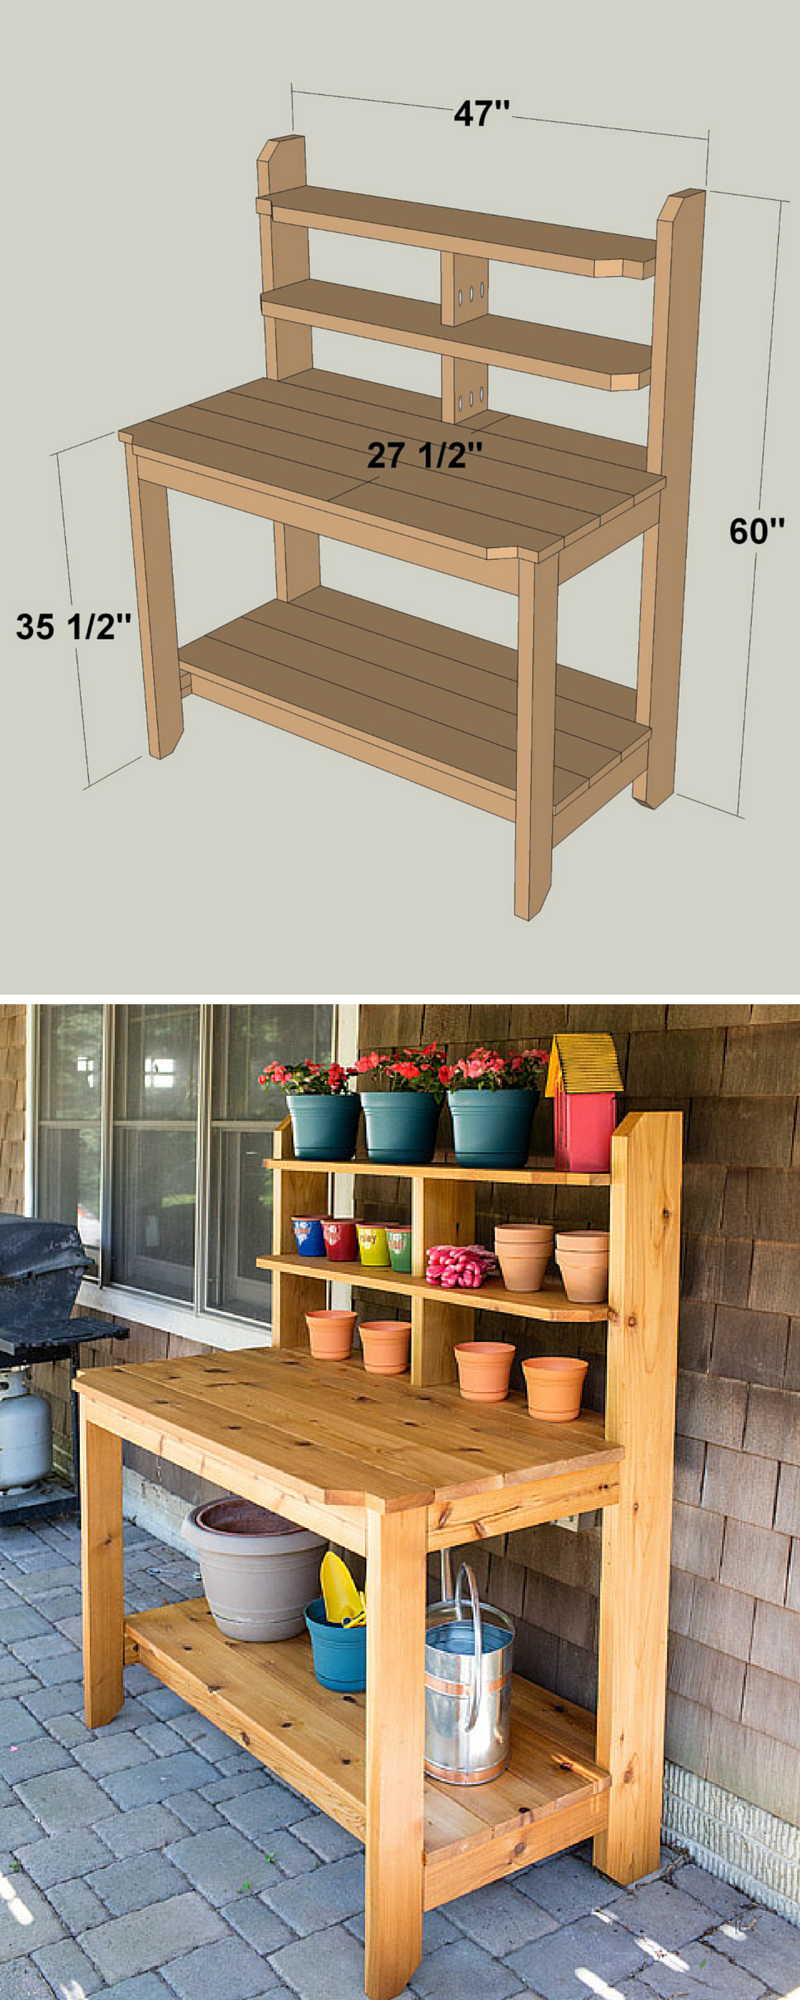 Create a great place for potting plants and gardening chores by building this tough, good-looking potting bench. This one is built